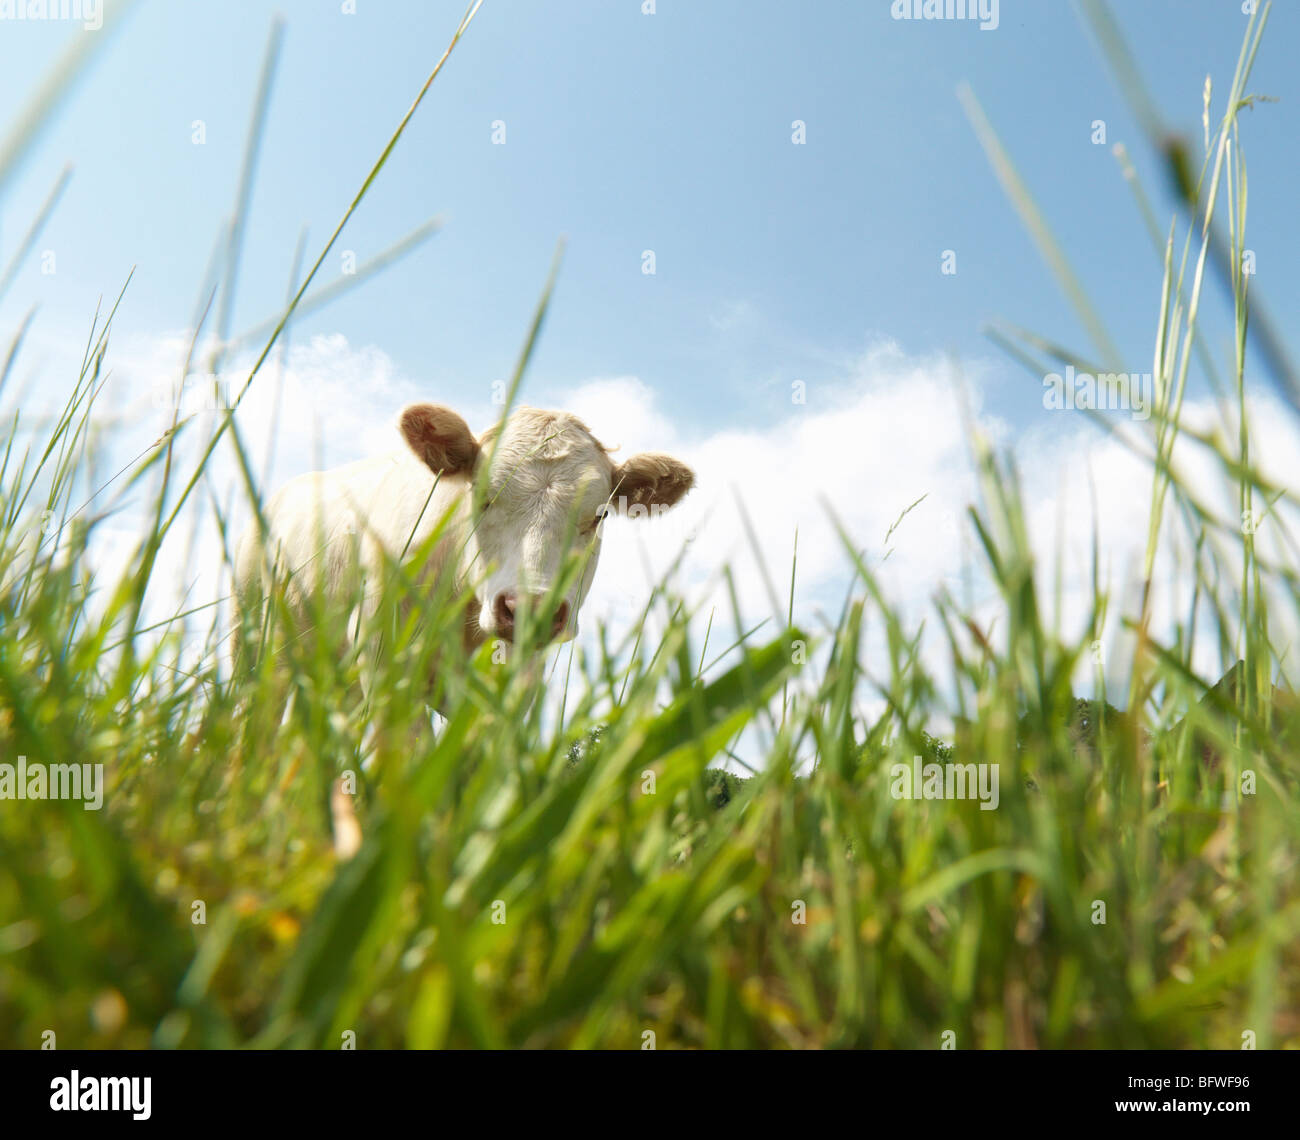 Cow in field Stock Photo